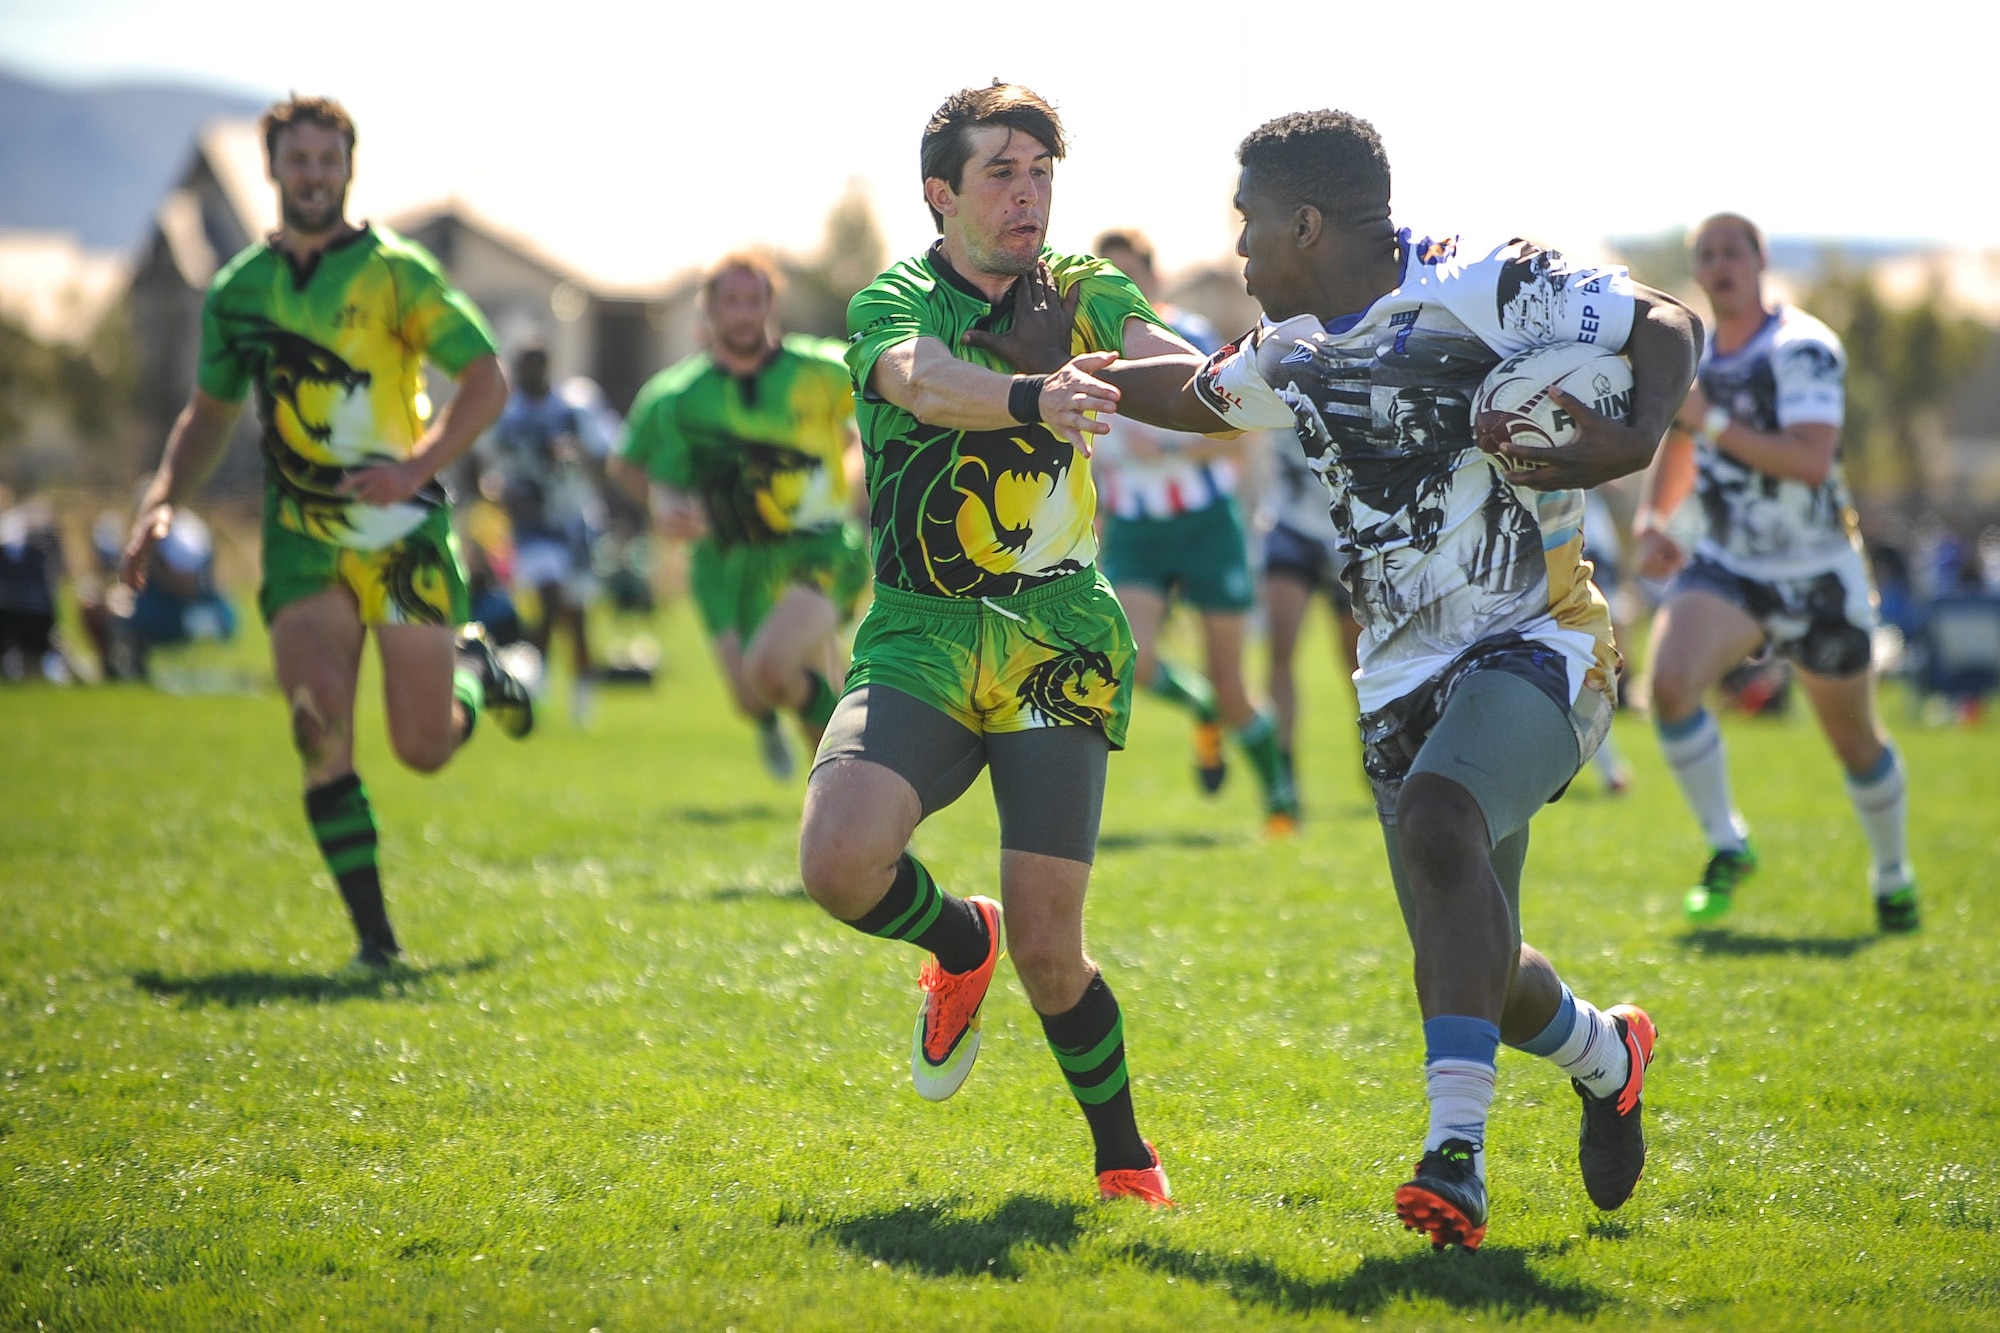 Malcolm Gilliam, a wing on the Air Force men’s rugby sevens team, stiff arms a defender during a Las Vegas Invitational match in Las Vegas, March 2, 2017. The tournament marked the first game action of the Air Force rugby program’s season, which will culminate in the Armed Forces Championship. (U.S. Air Force photo by Staff Sgt. Siuta B. Ika)